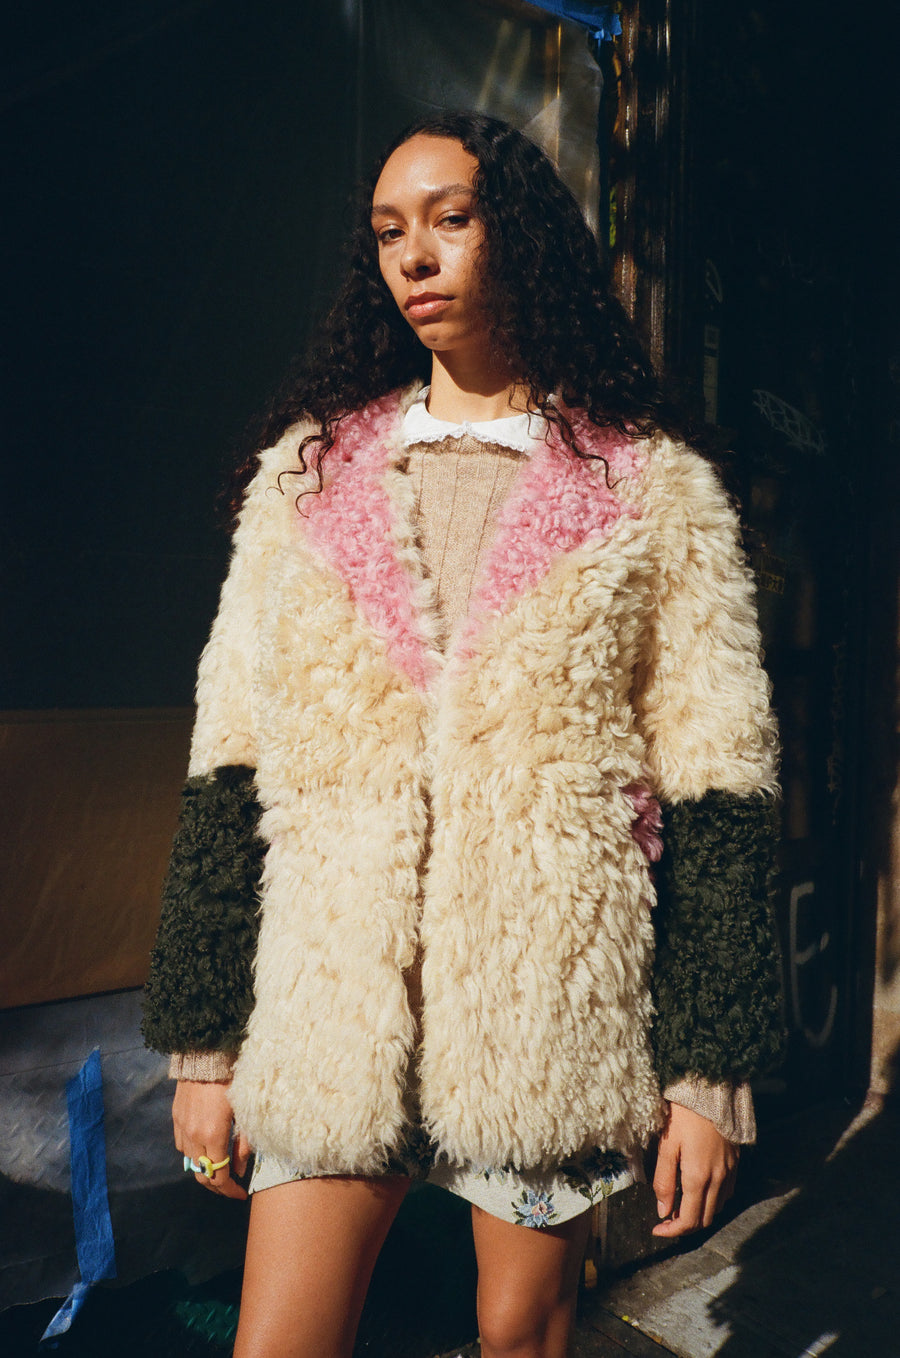 Shearling coat with contrast pink, cream, and green details on model